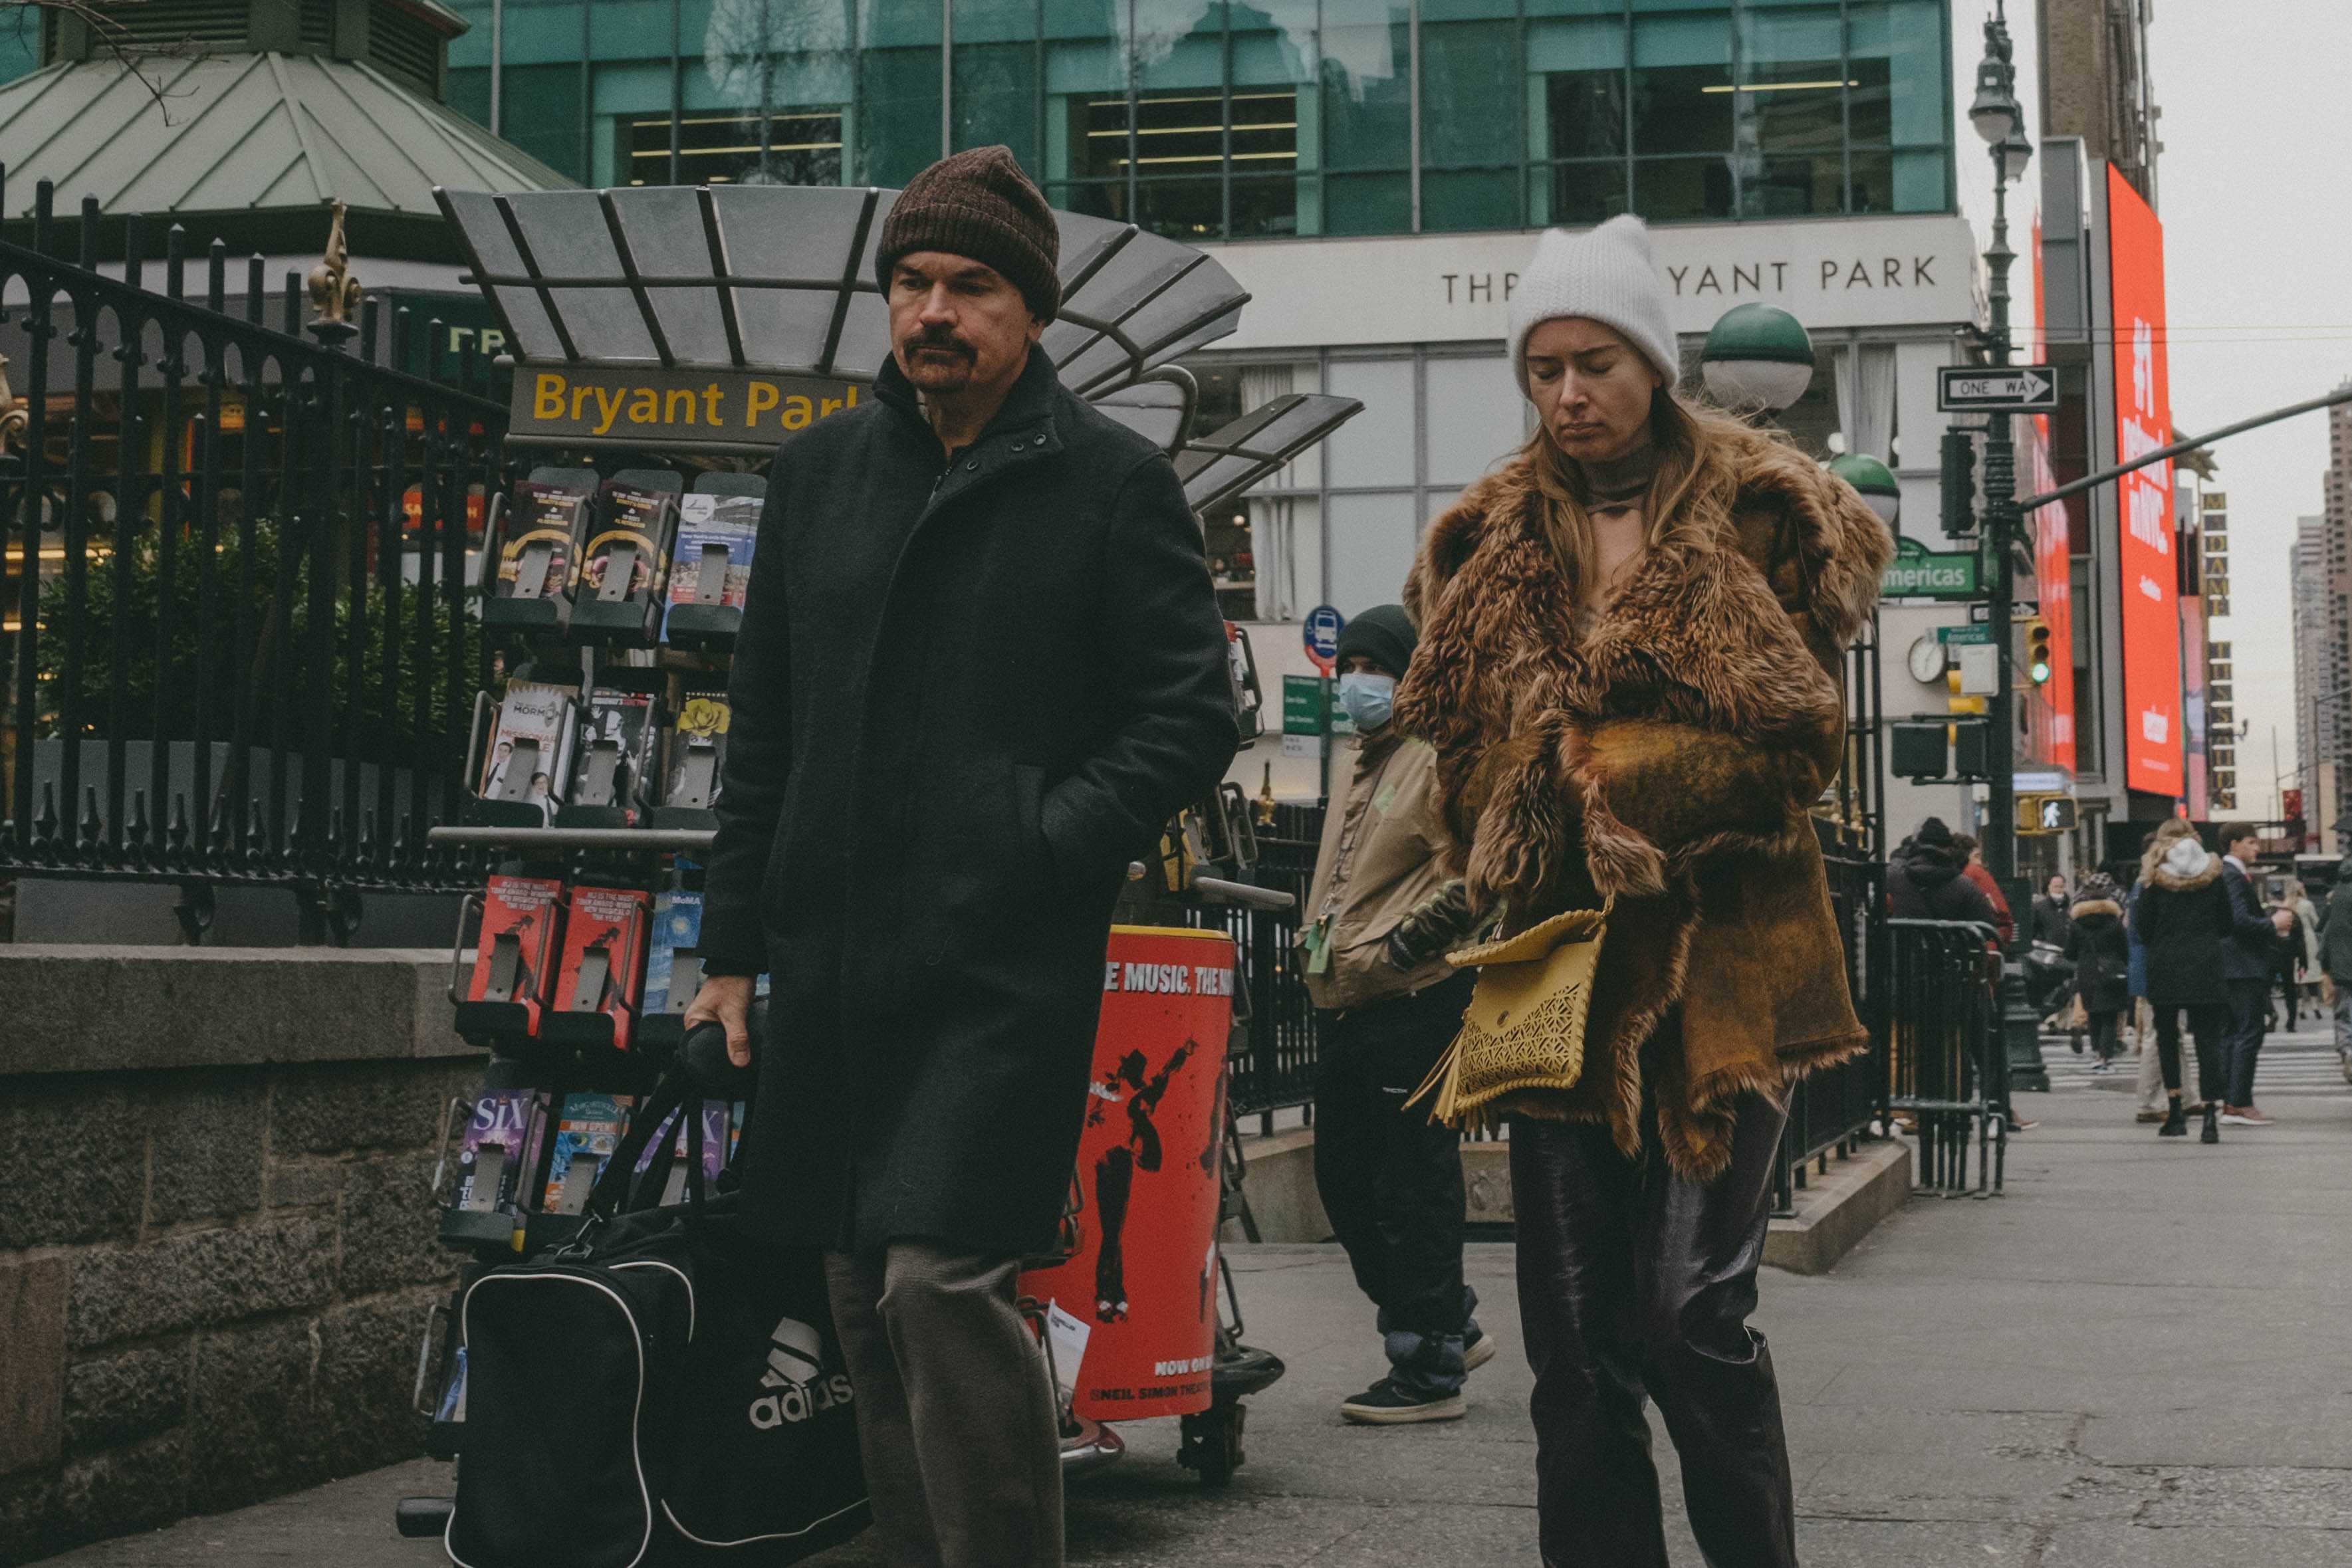 Two people walking, looking expressionless at the ground. One is a woman with a worn-down fur coat.